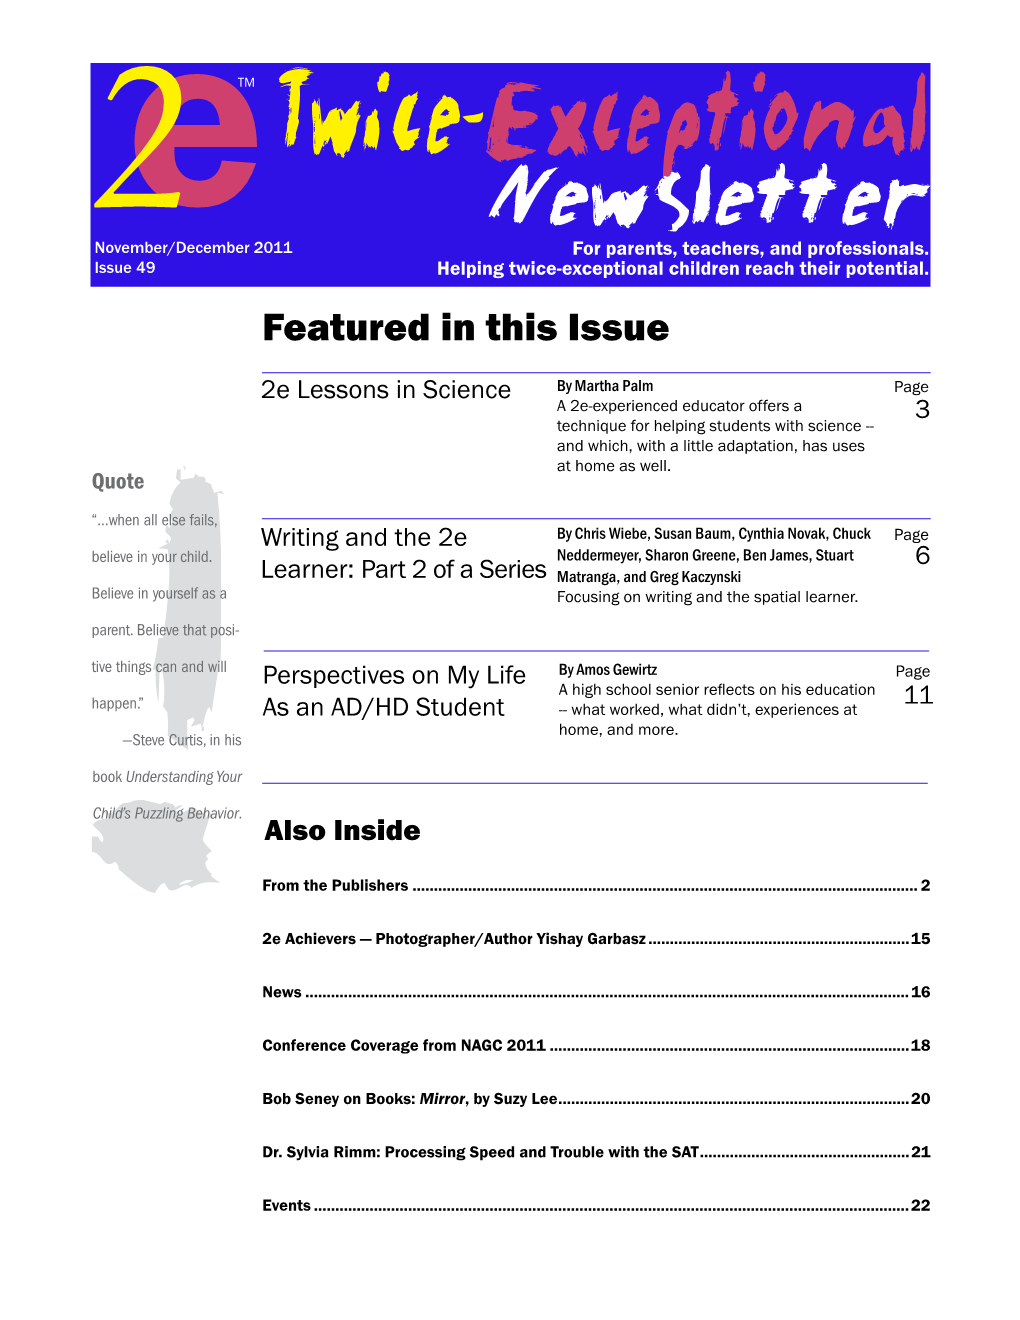 Twice-Exceptional Newsletter 2November/December 2011 for Parents, Teachers, and Professionals